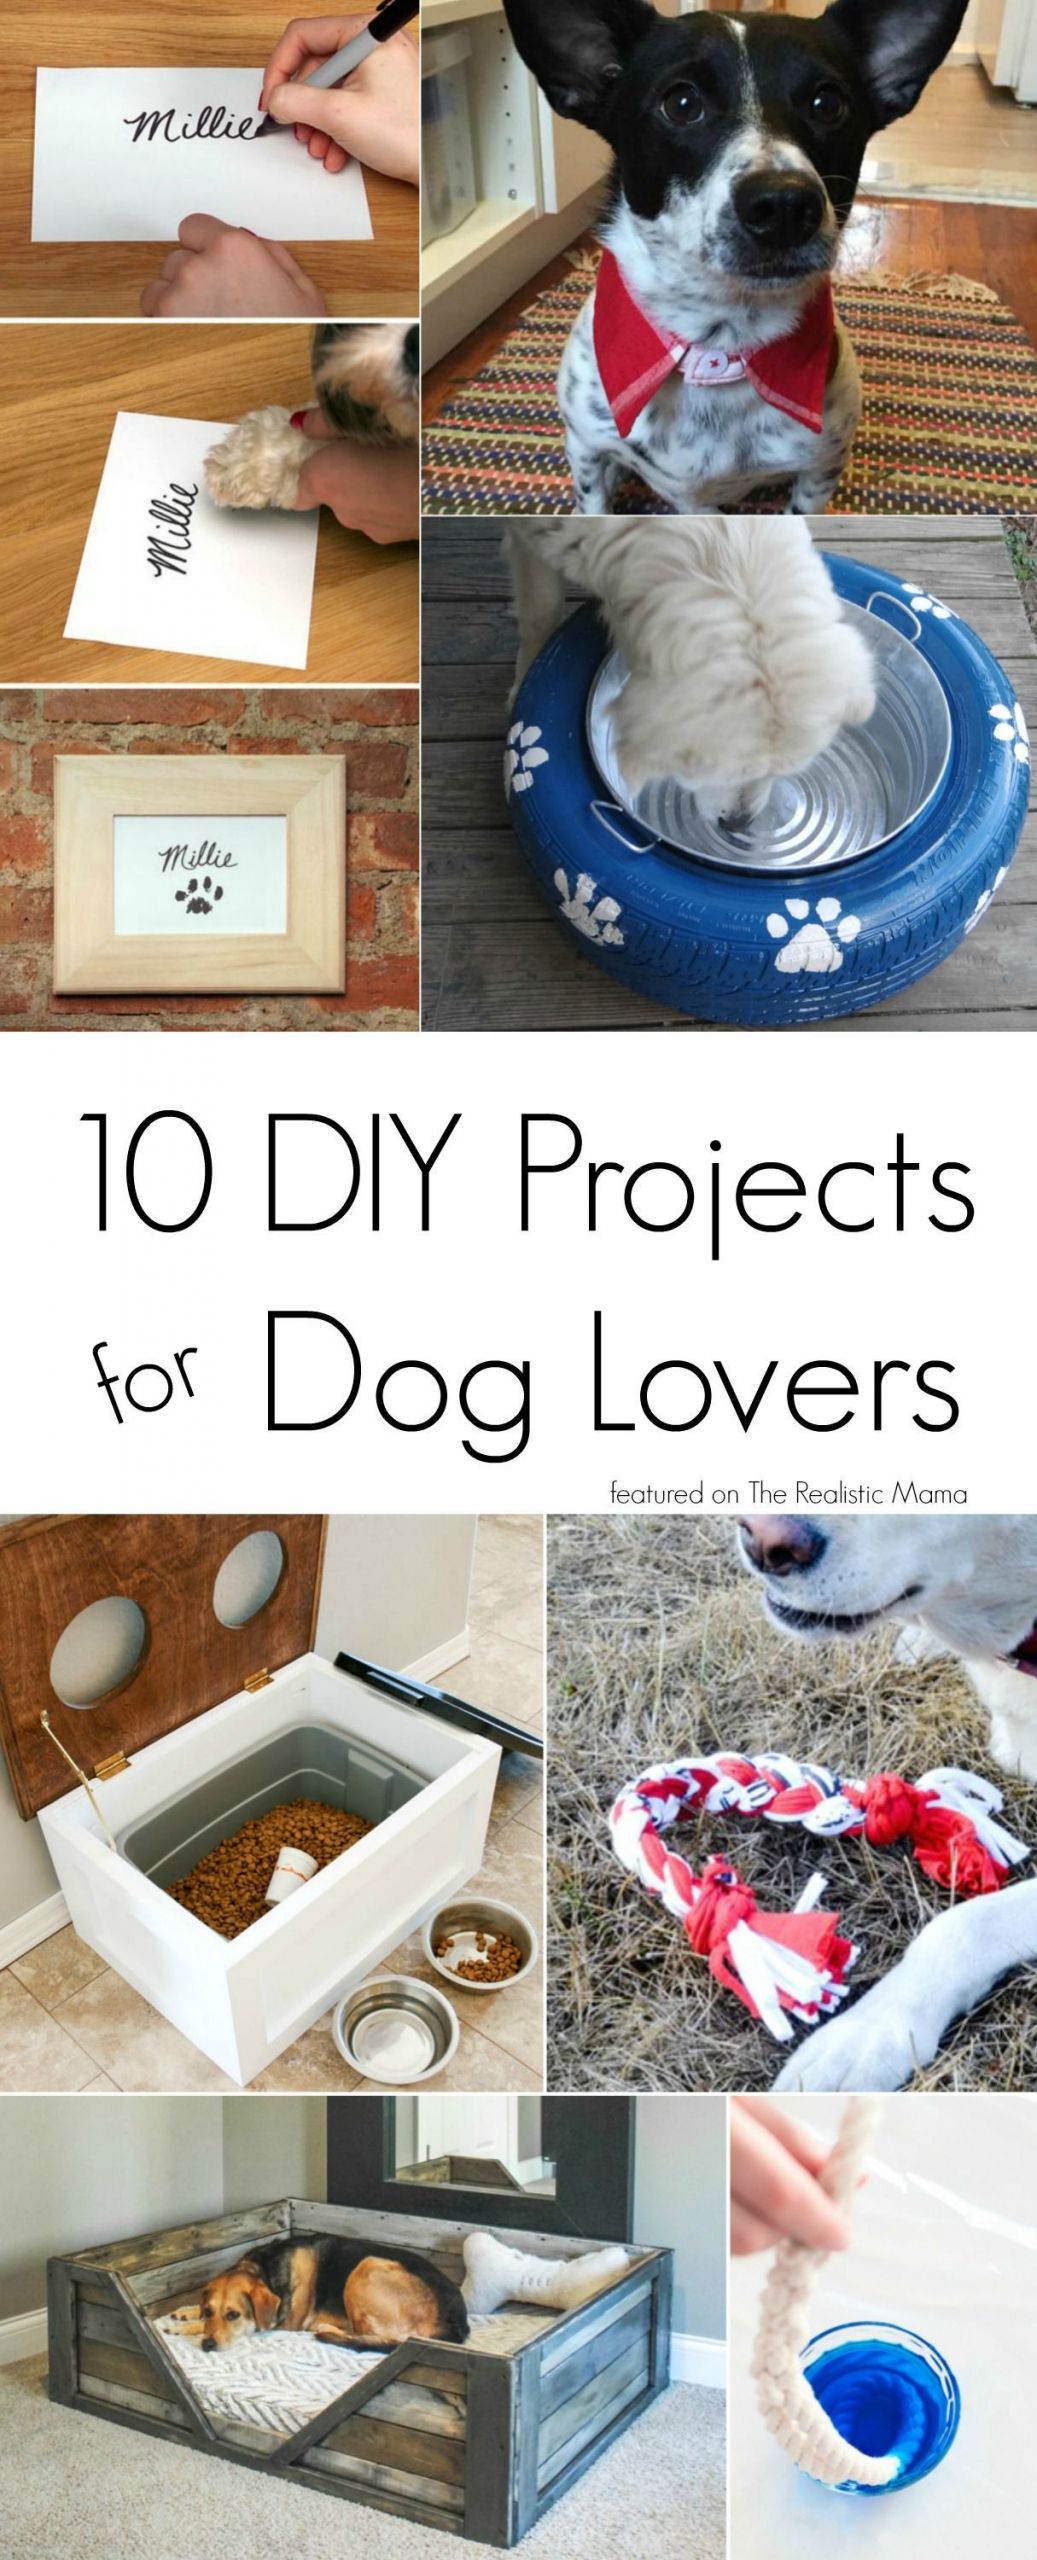 Craft Ideas For Dog Lovers
 10 DIY Projects for Dog Lovers